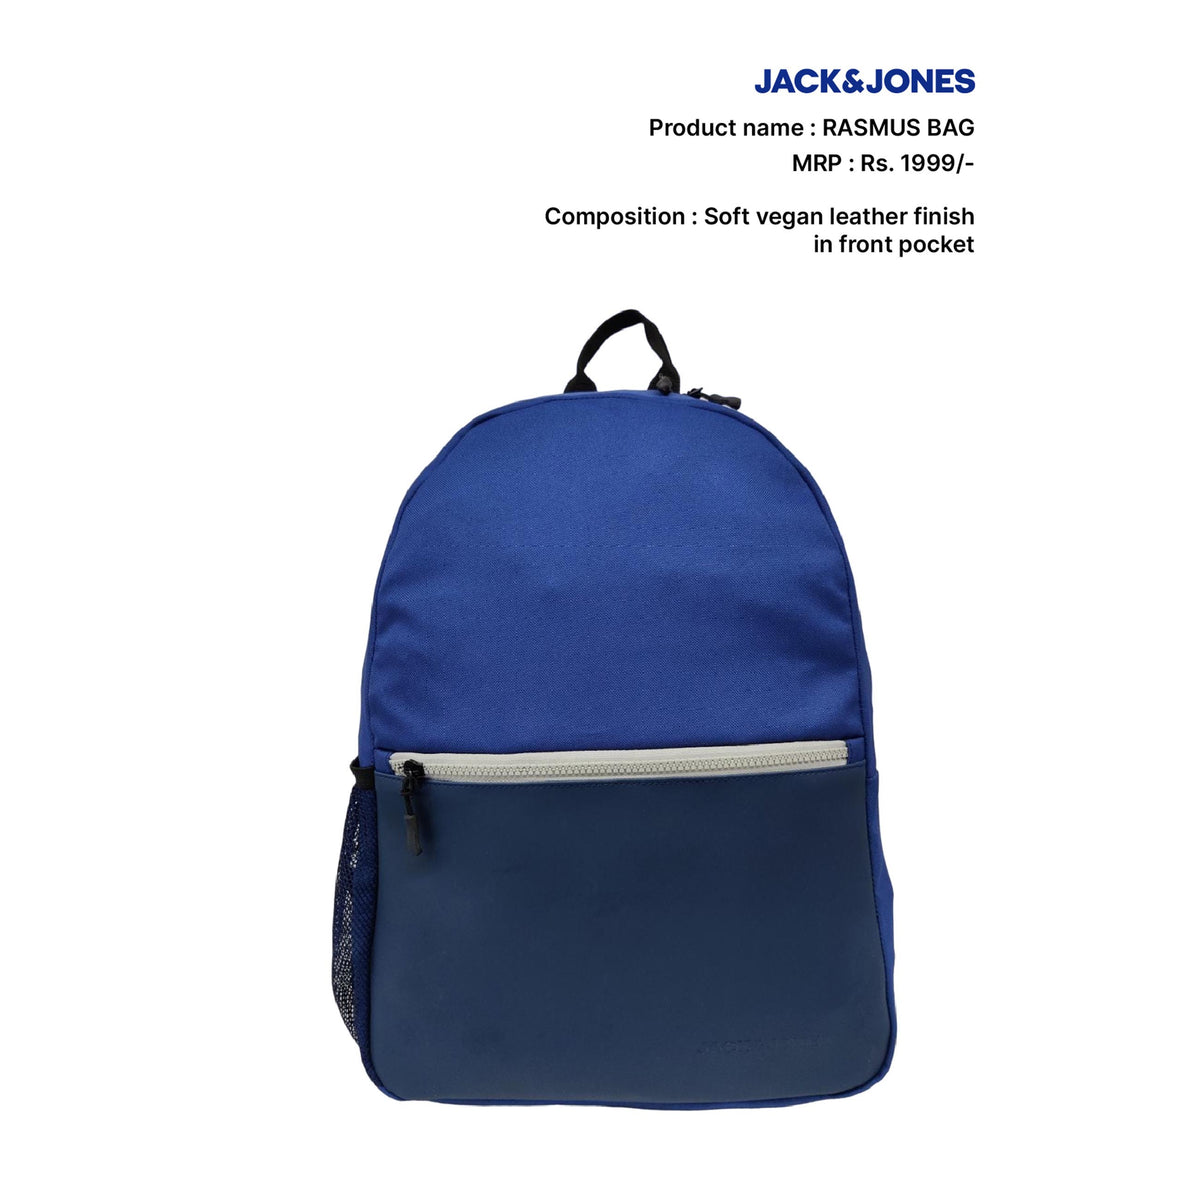 Casual Blue Backpack- Light Yellow Zippers And Handle